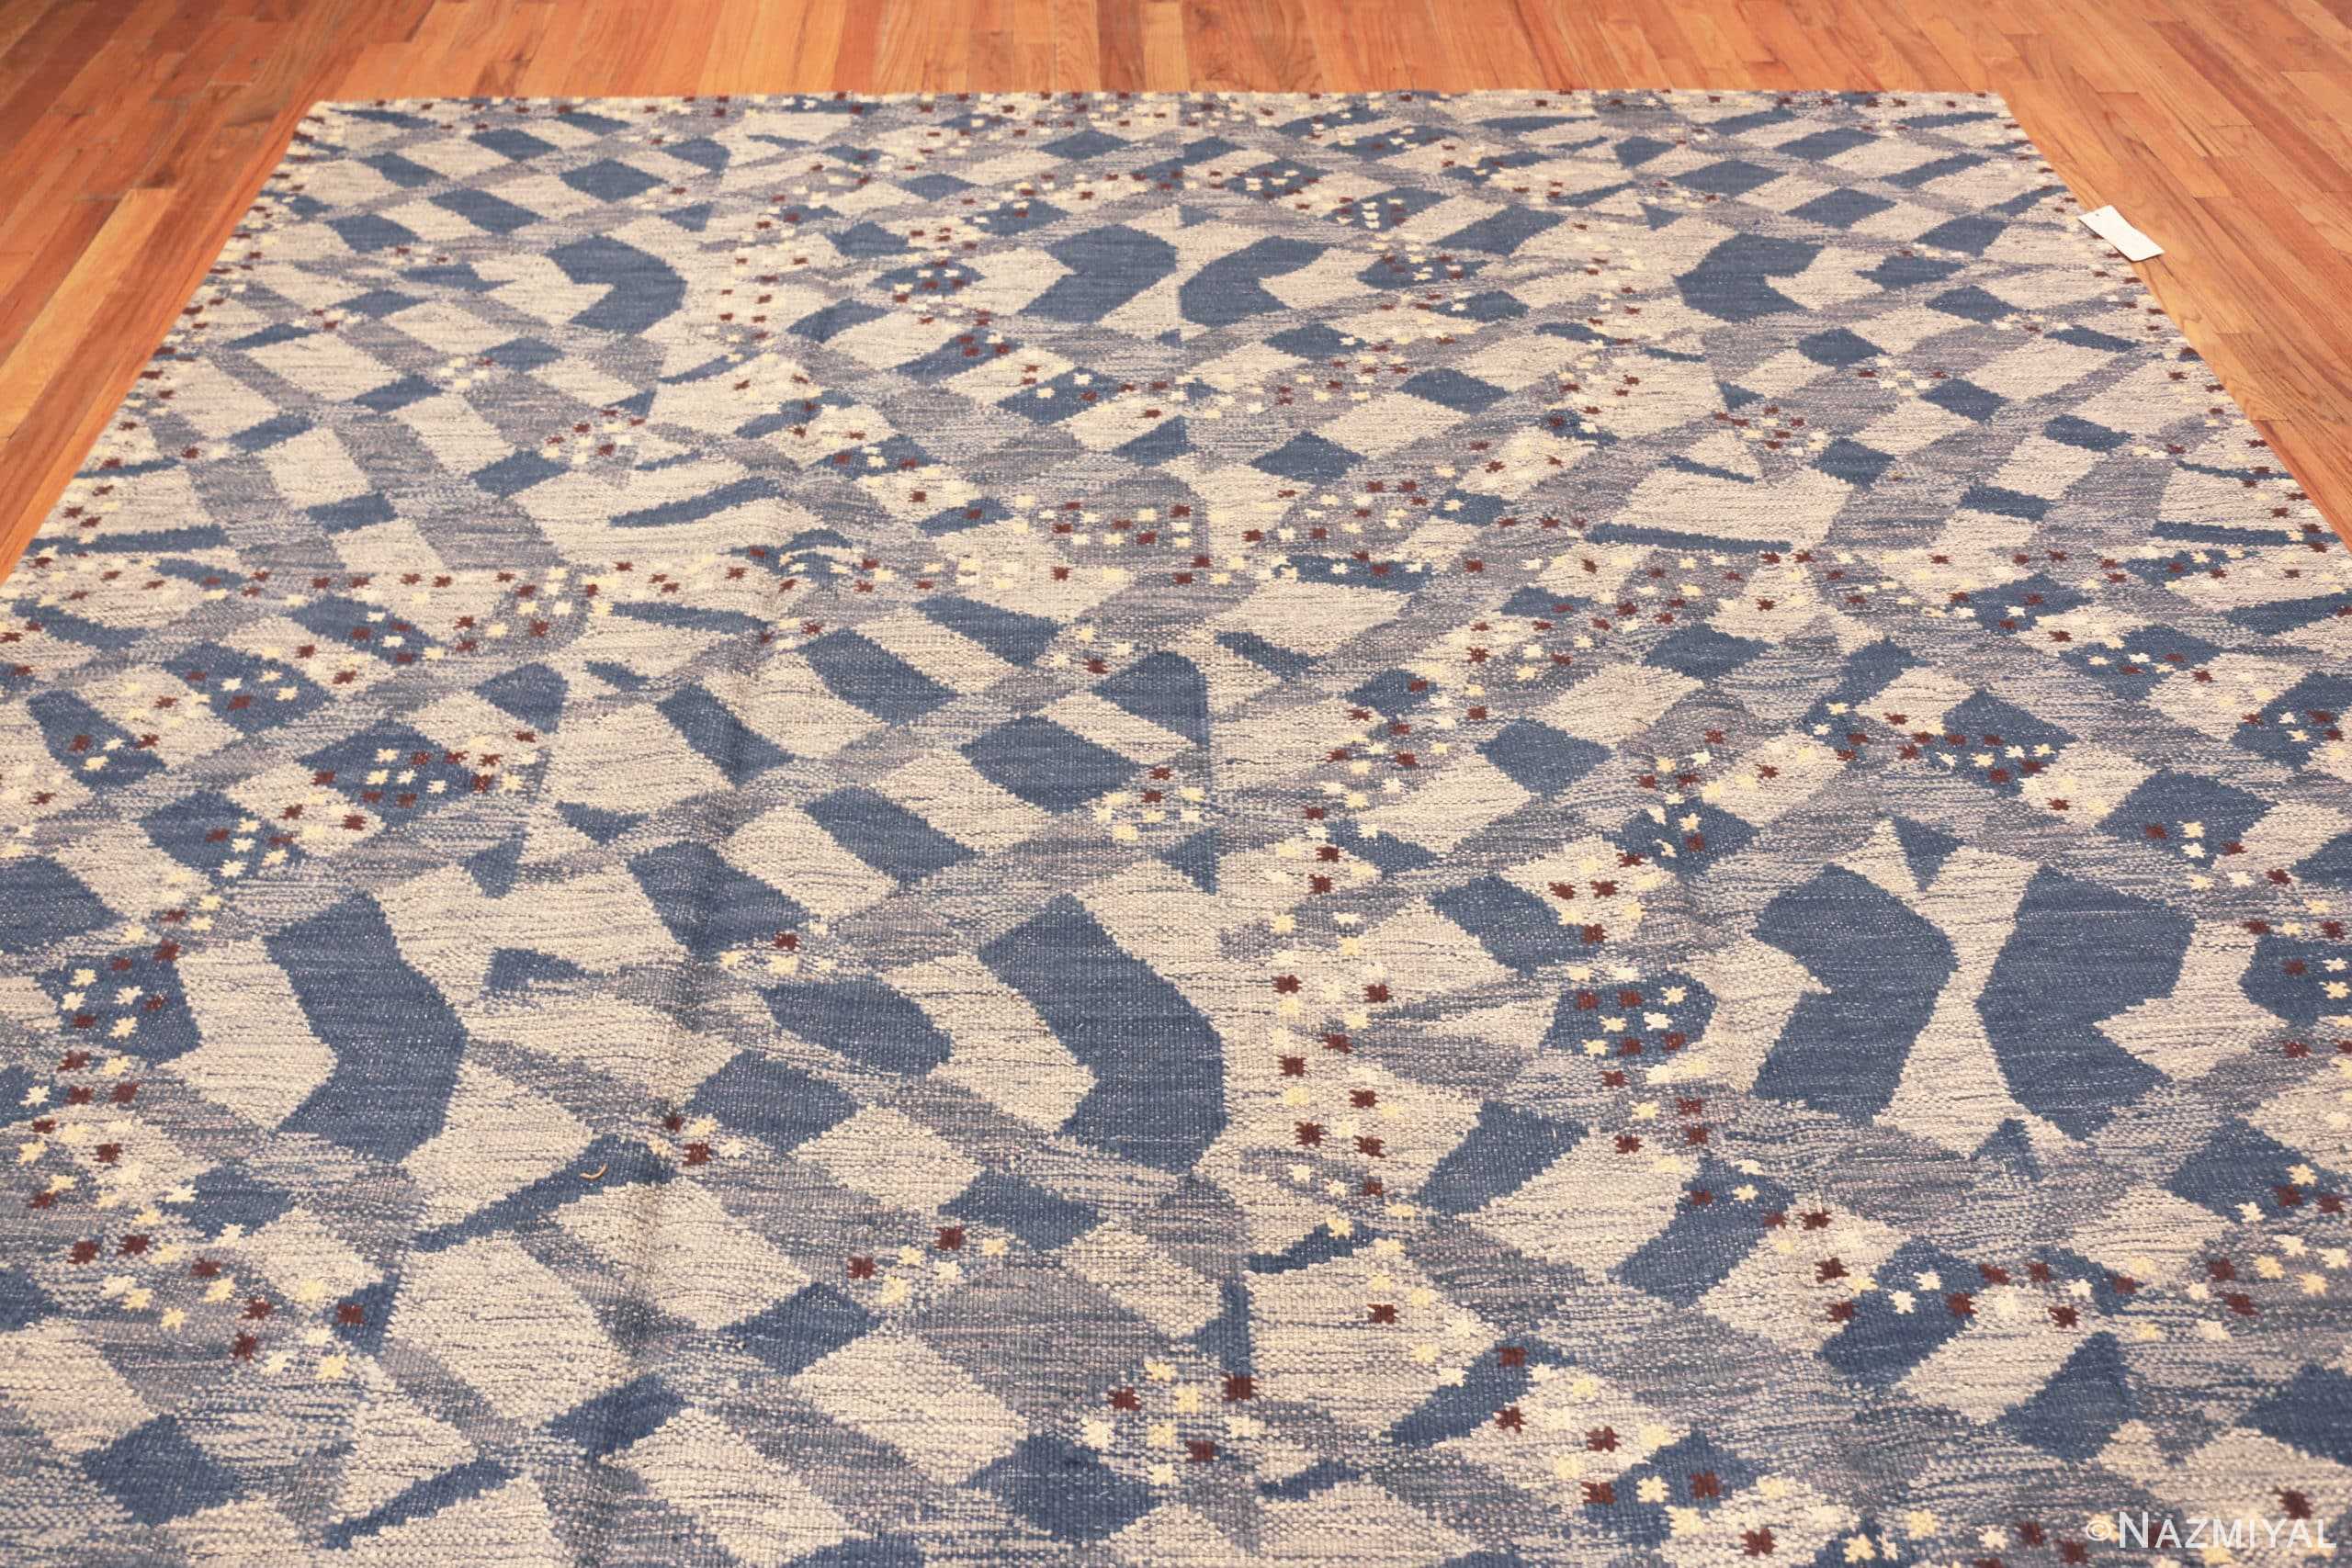 Detail Of Magnificent Swedish Inspired Blue Area Rug 60895 by Nazmiyal Antique Rugs